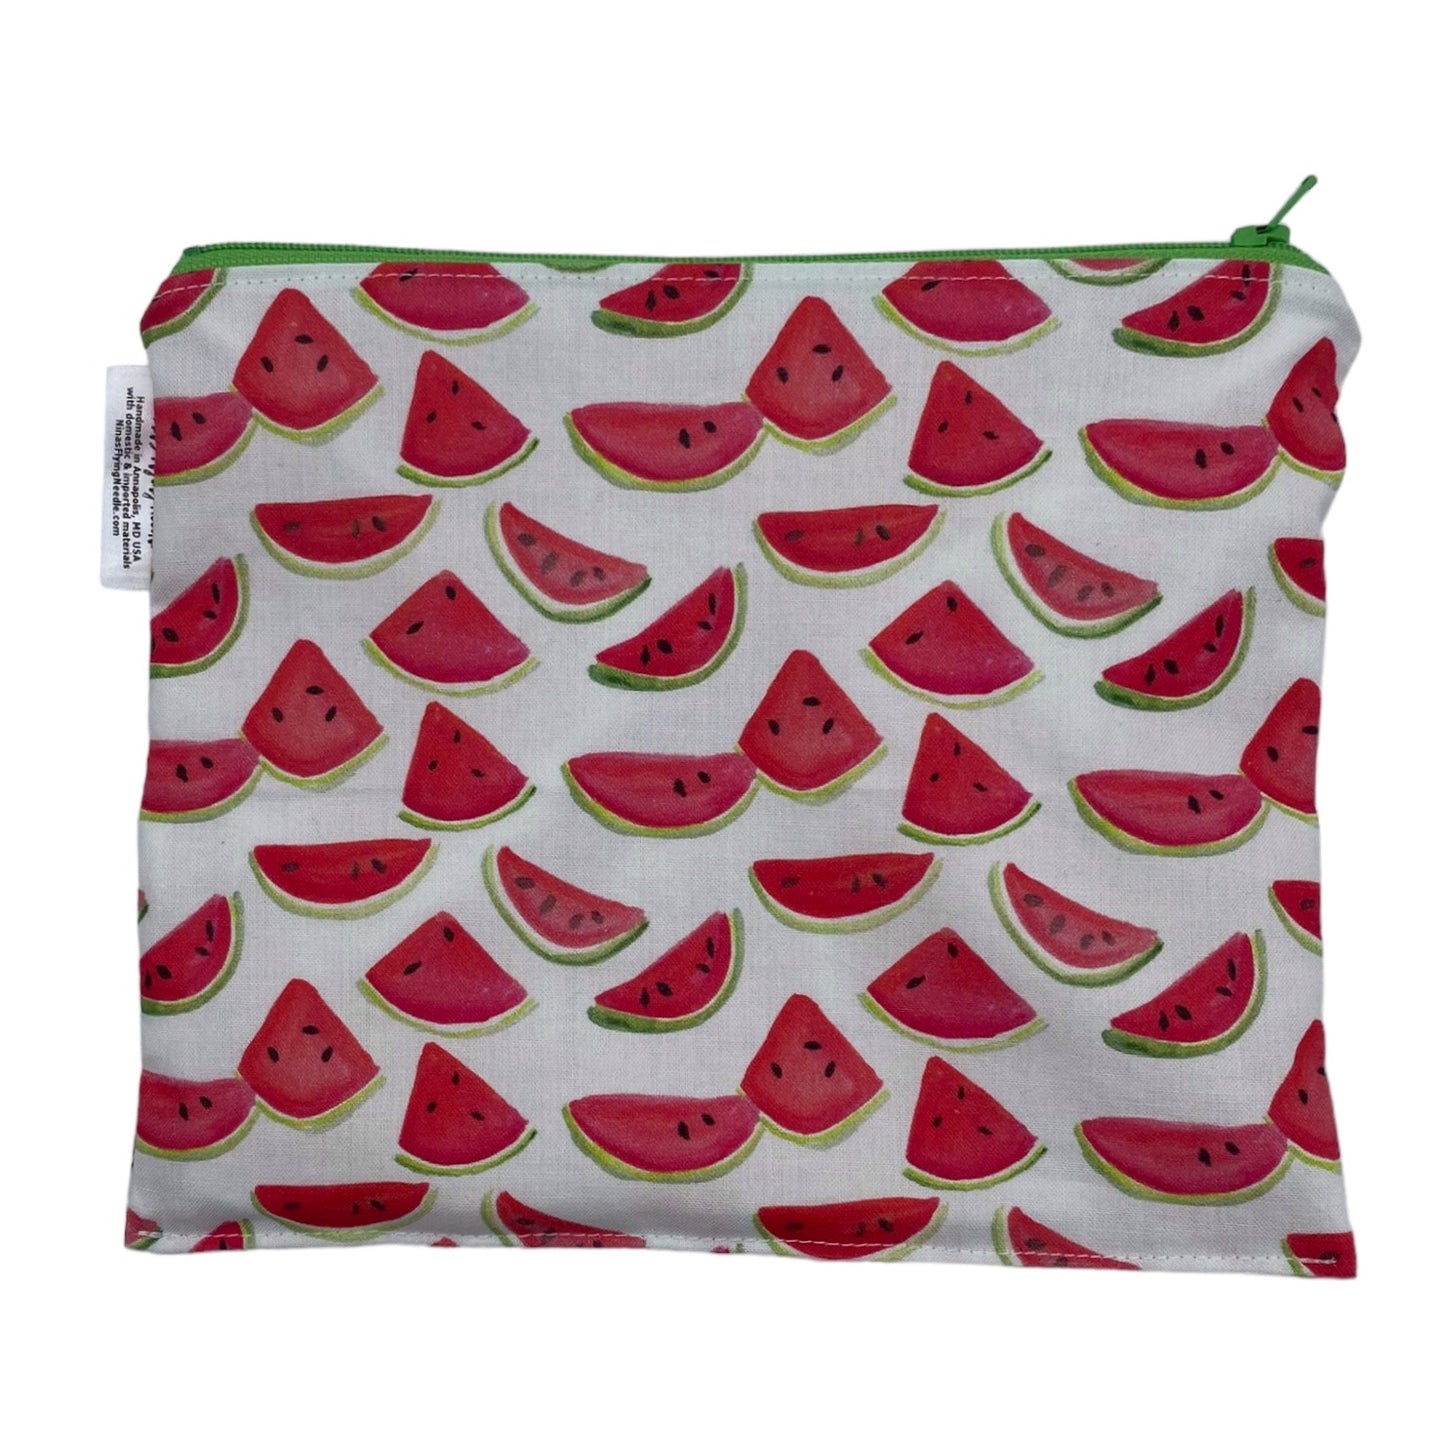 Small Sized Wet Bag Watermelon Slices